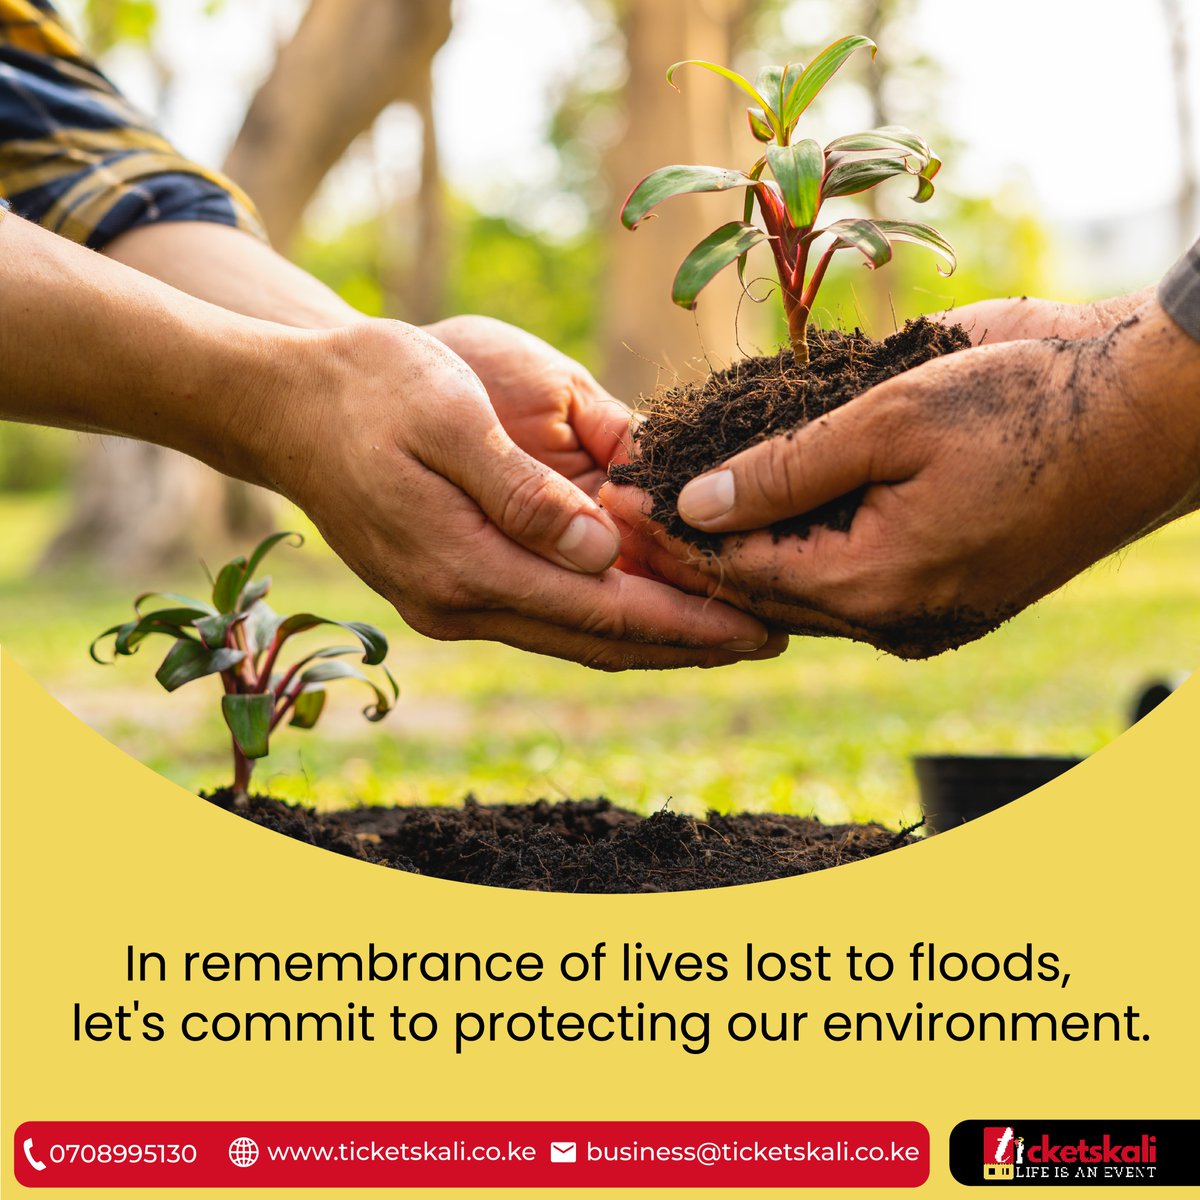 🌊 Honoring those we've lost to floods, let's unite in safeguarding our planet. 
🌍 Every action counts, from reducing waste to advocating for sustainable practices. 
💚Together, we can create a safer, more resilient future. 
#ProtectOurPlanet #RememberingWithAction #TicketsKali